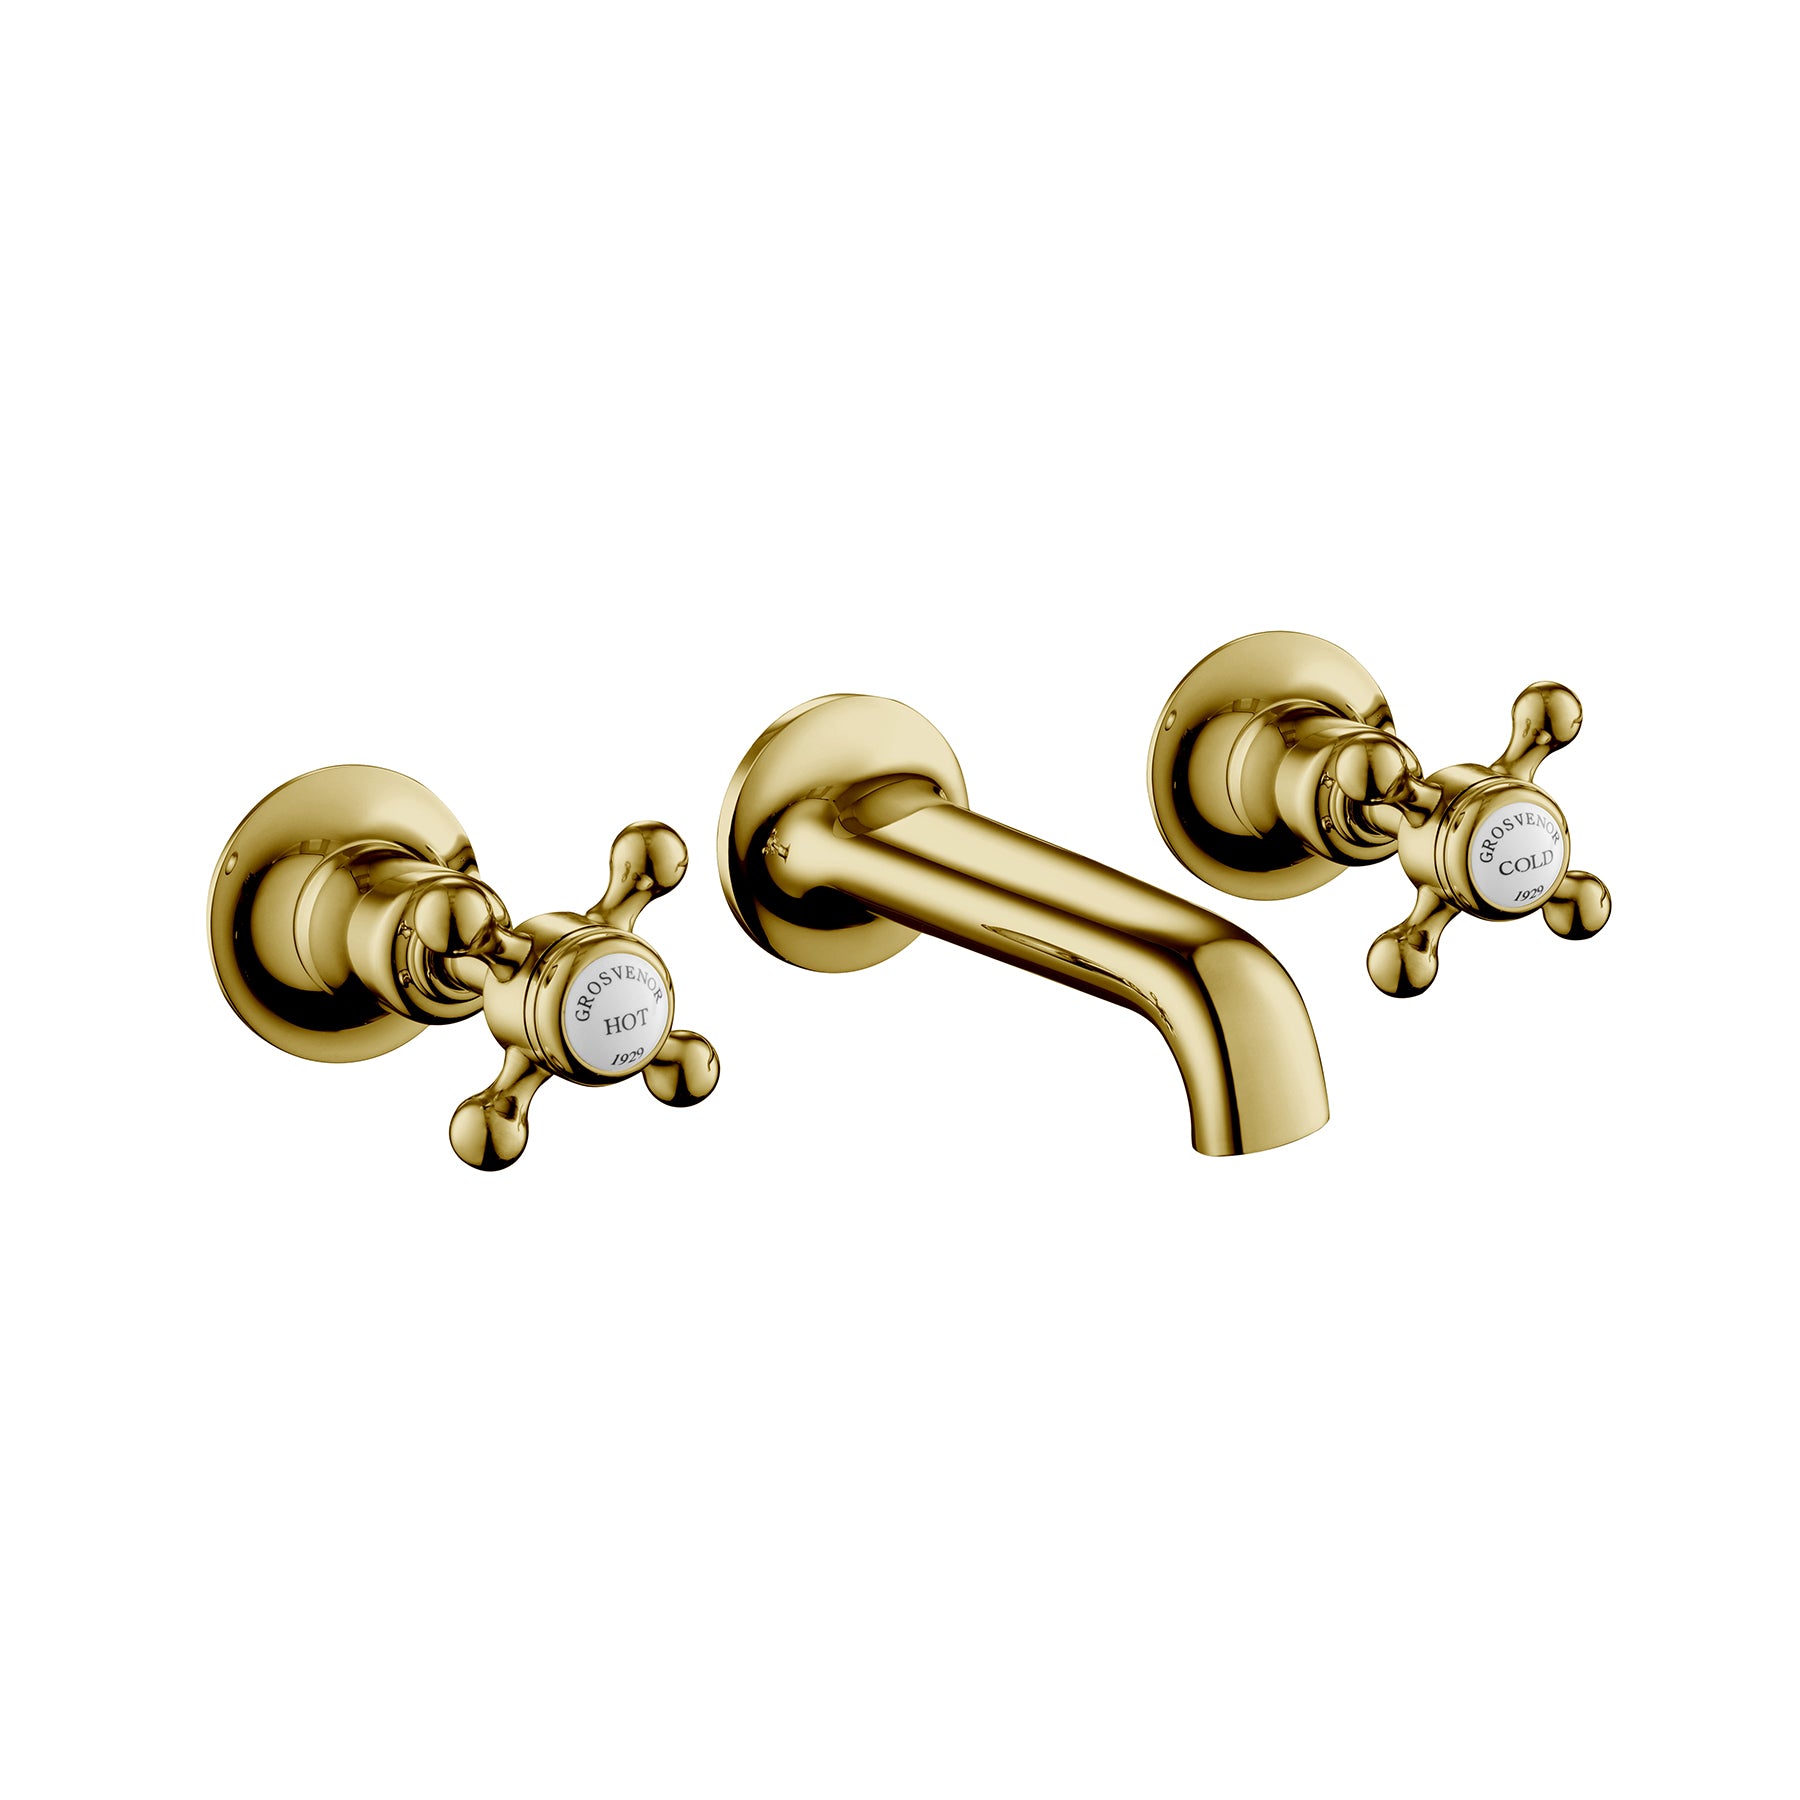 Cross 3 Hole Gold Basin Taps with Wall Mounted Fitting and Precise control Handles for water flow and temperature,